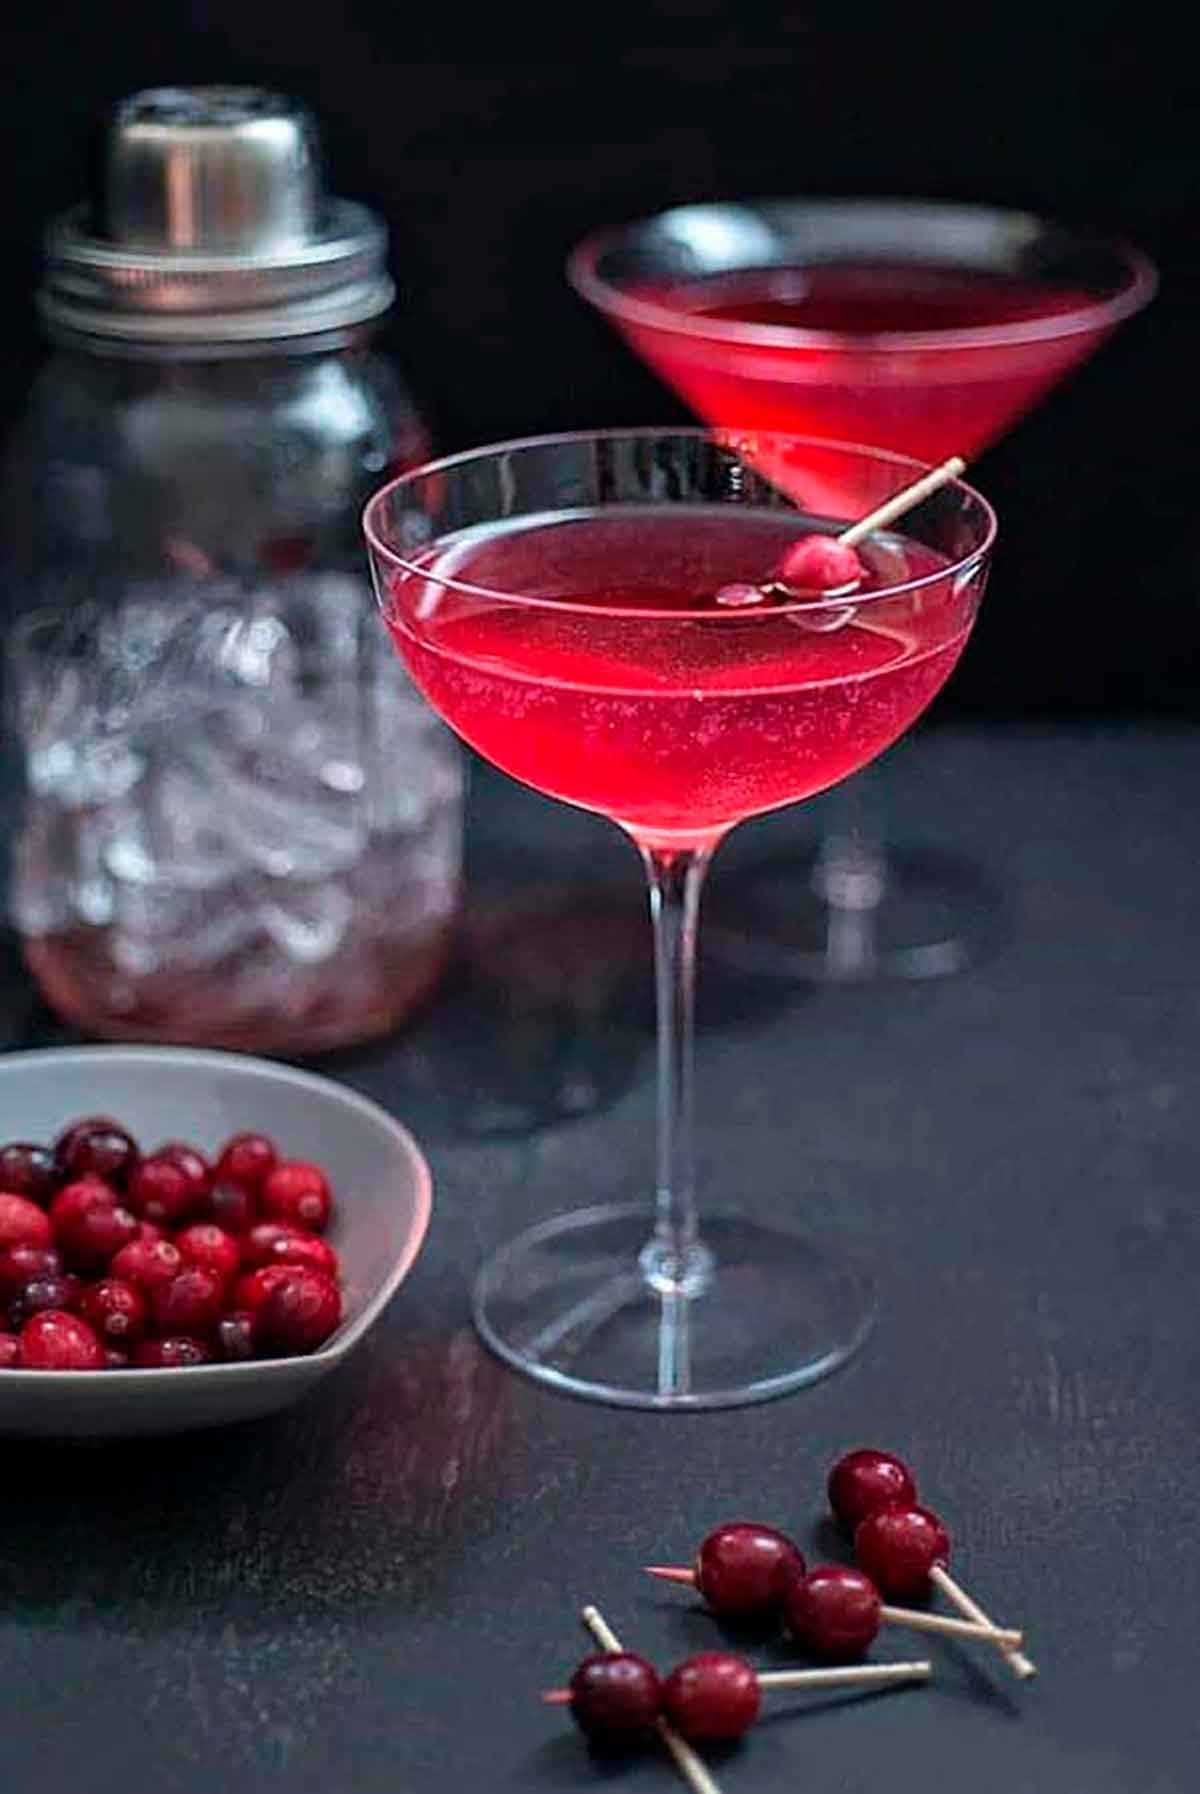 2 red cocktails in a dark setting, garnished with cranberries.